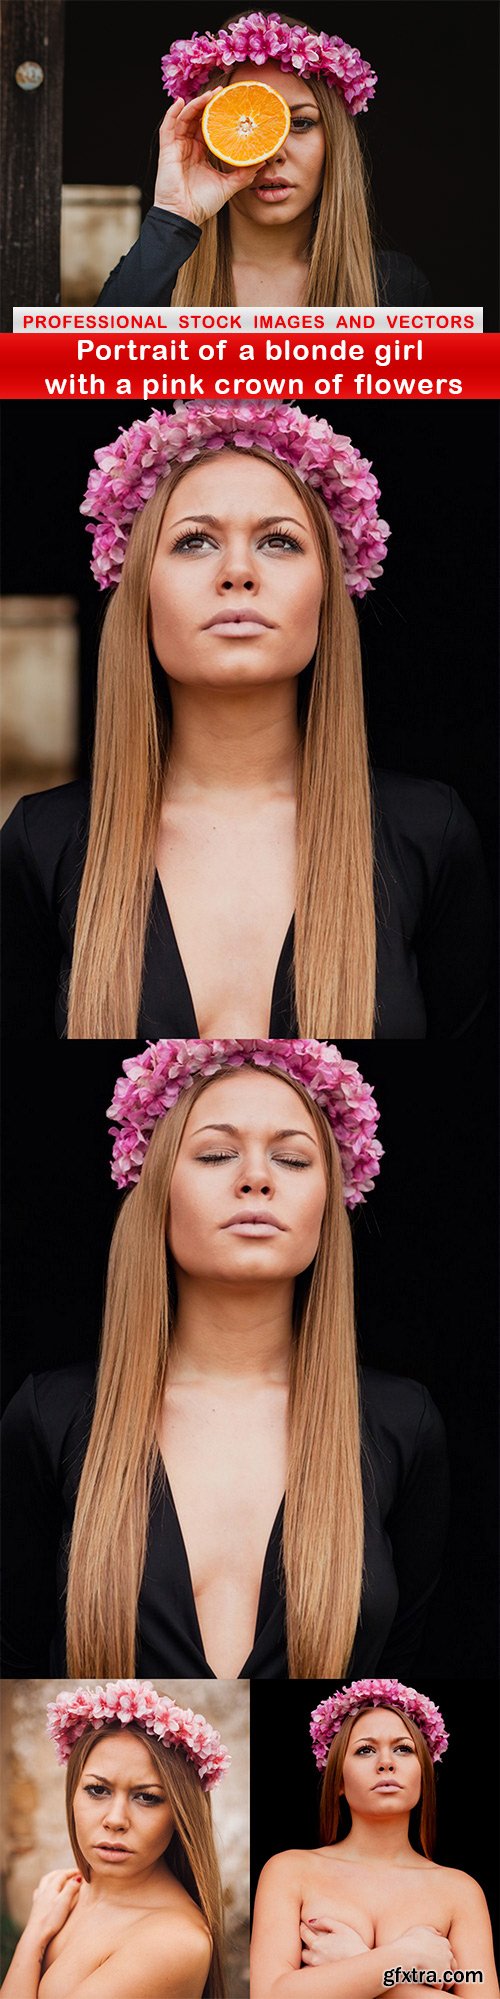 Portrait of a blonde girl with a pink crown of flowers - 5 UHQ JPEG